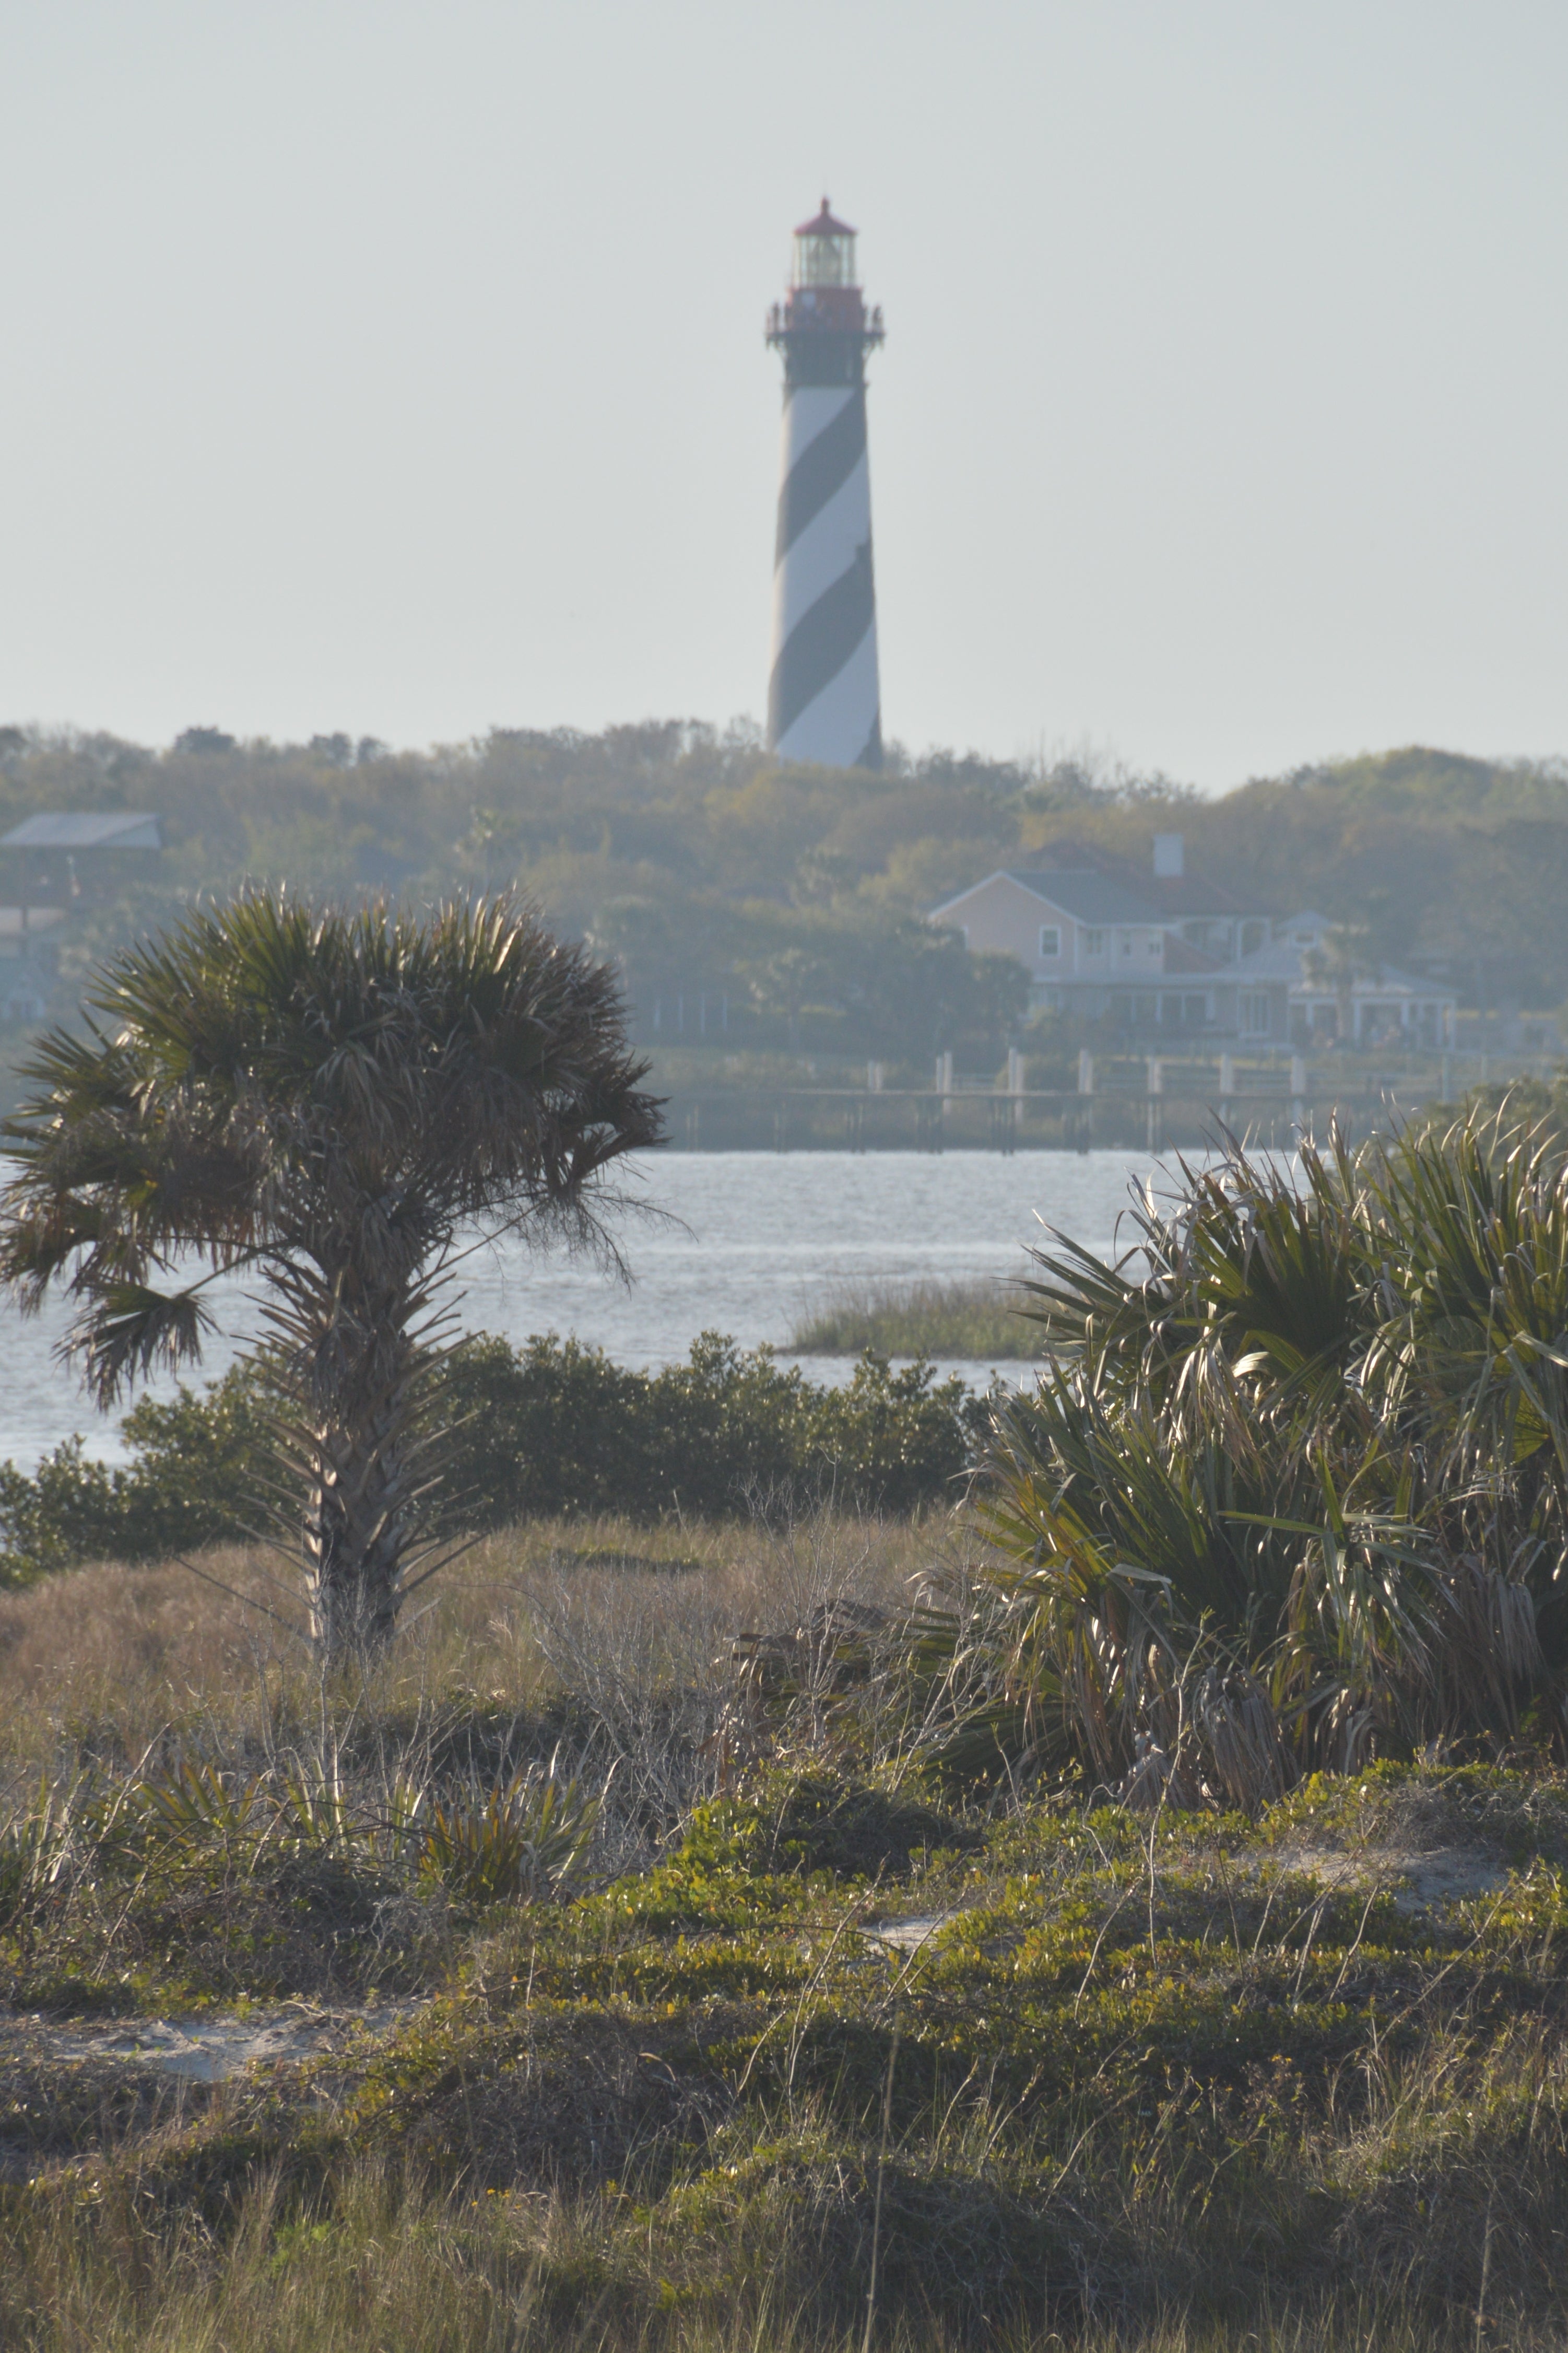 View of the St Augustine Lighthouse from the campground beach